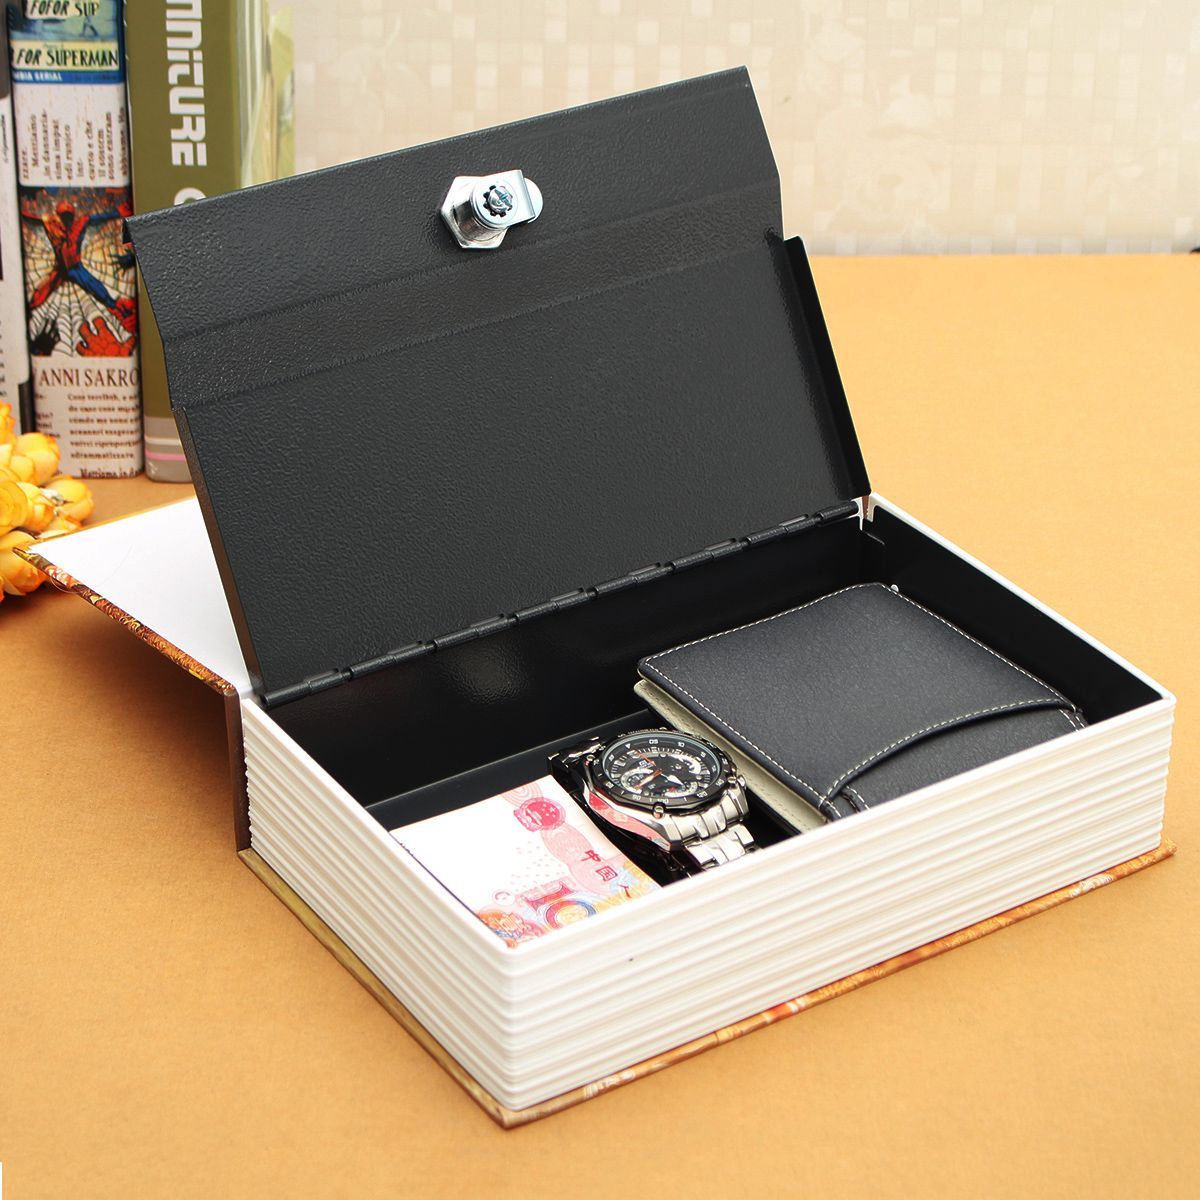 Stainless-Steel-Dictionary-Security-Safe-Gift-Box-Piggy-Bank-Collections-Storage-with-Key-1304639